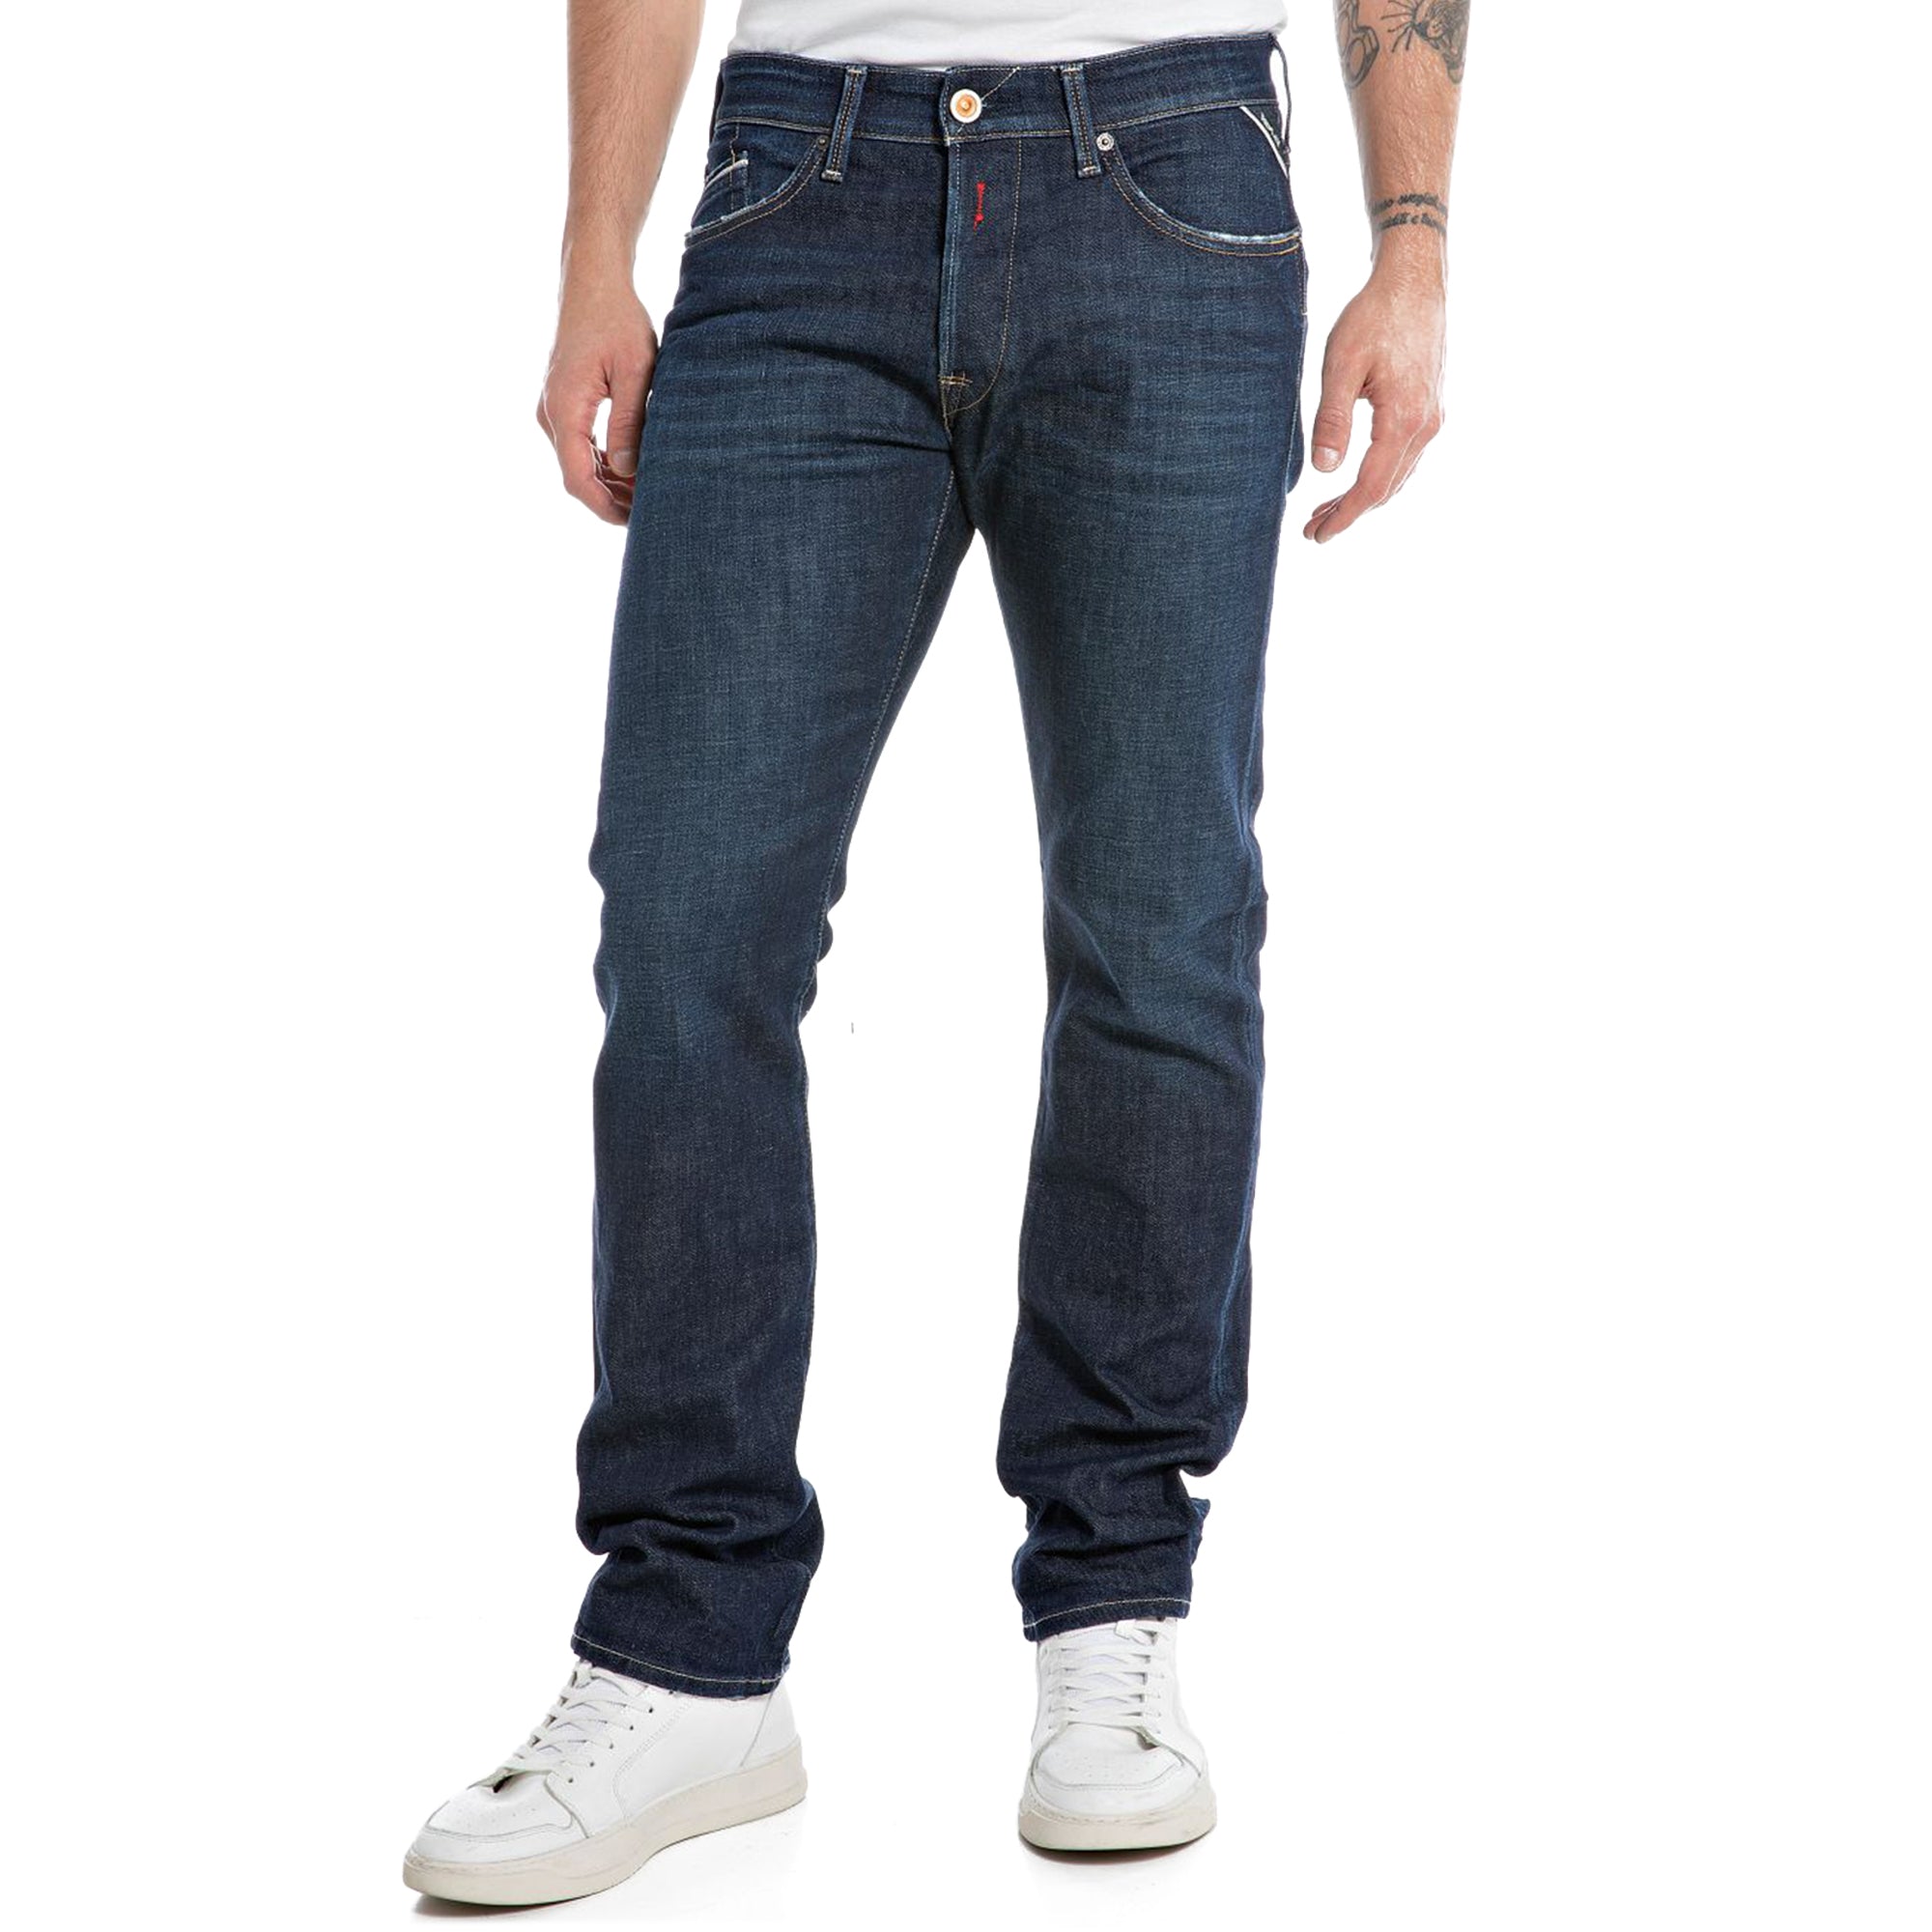 Replay Waitom Regular Fit Jeans - Washed Dark Blue